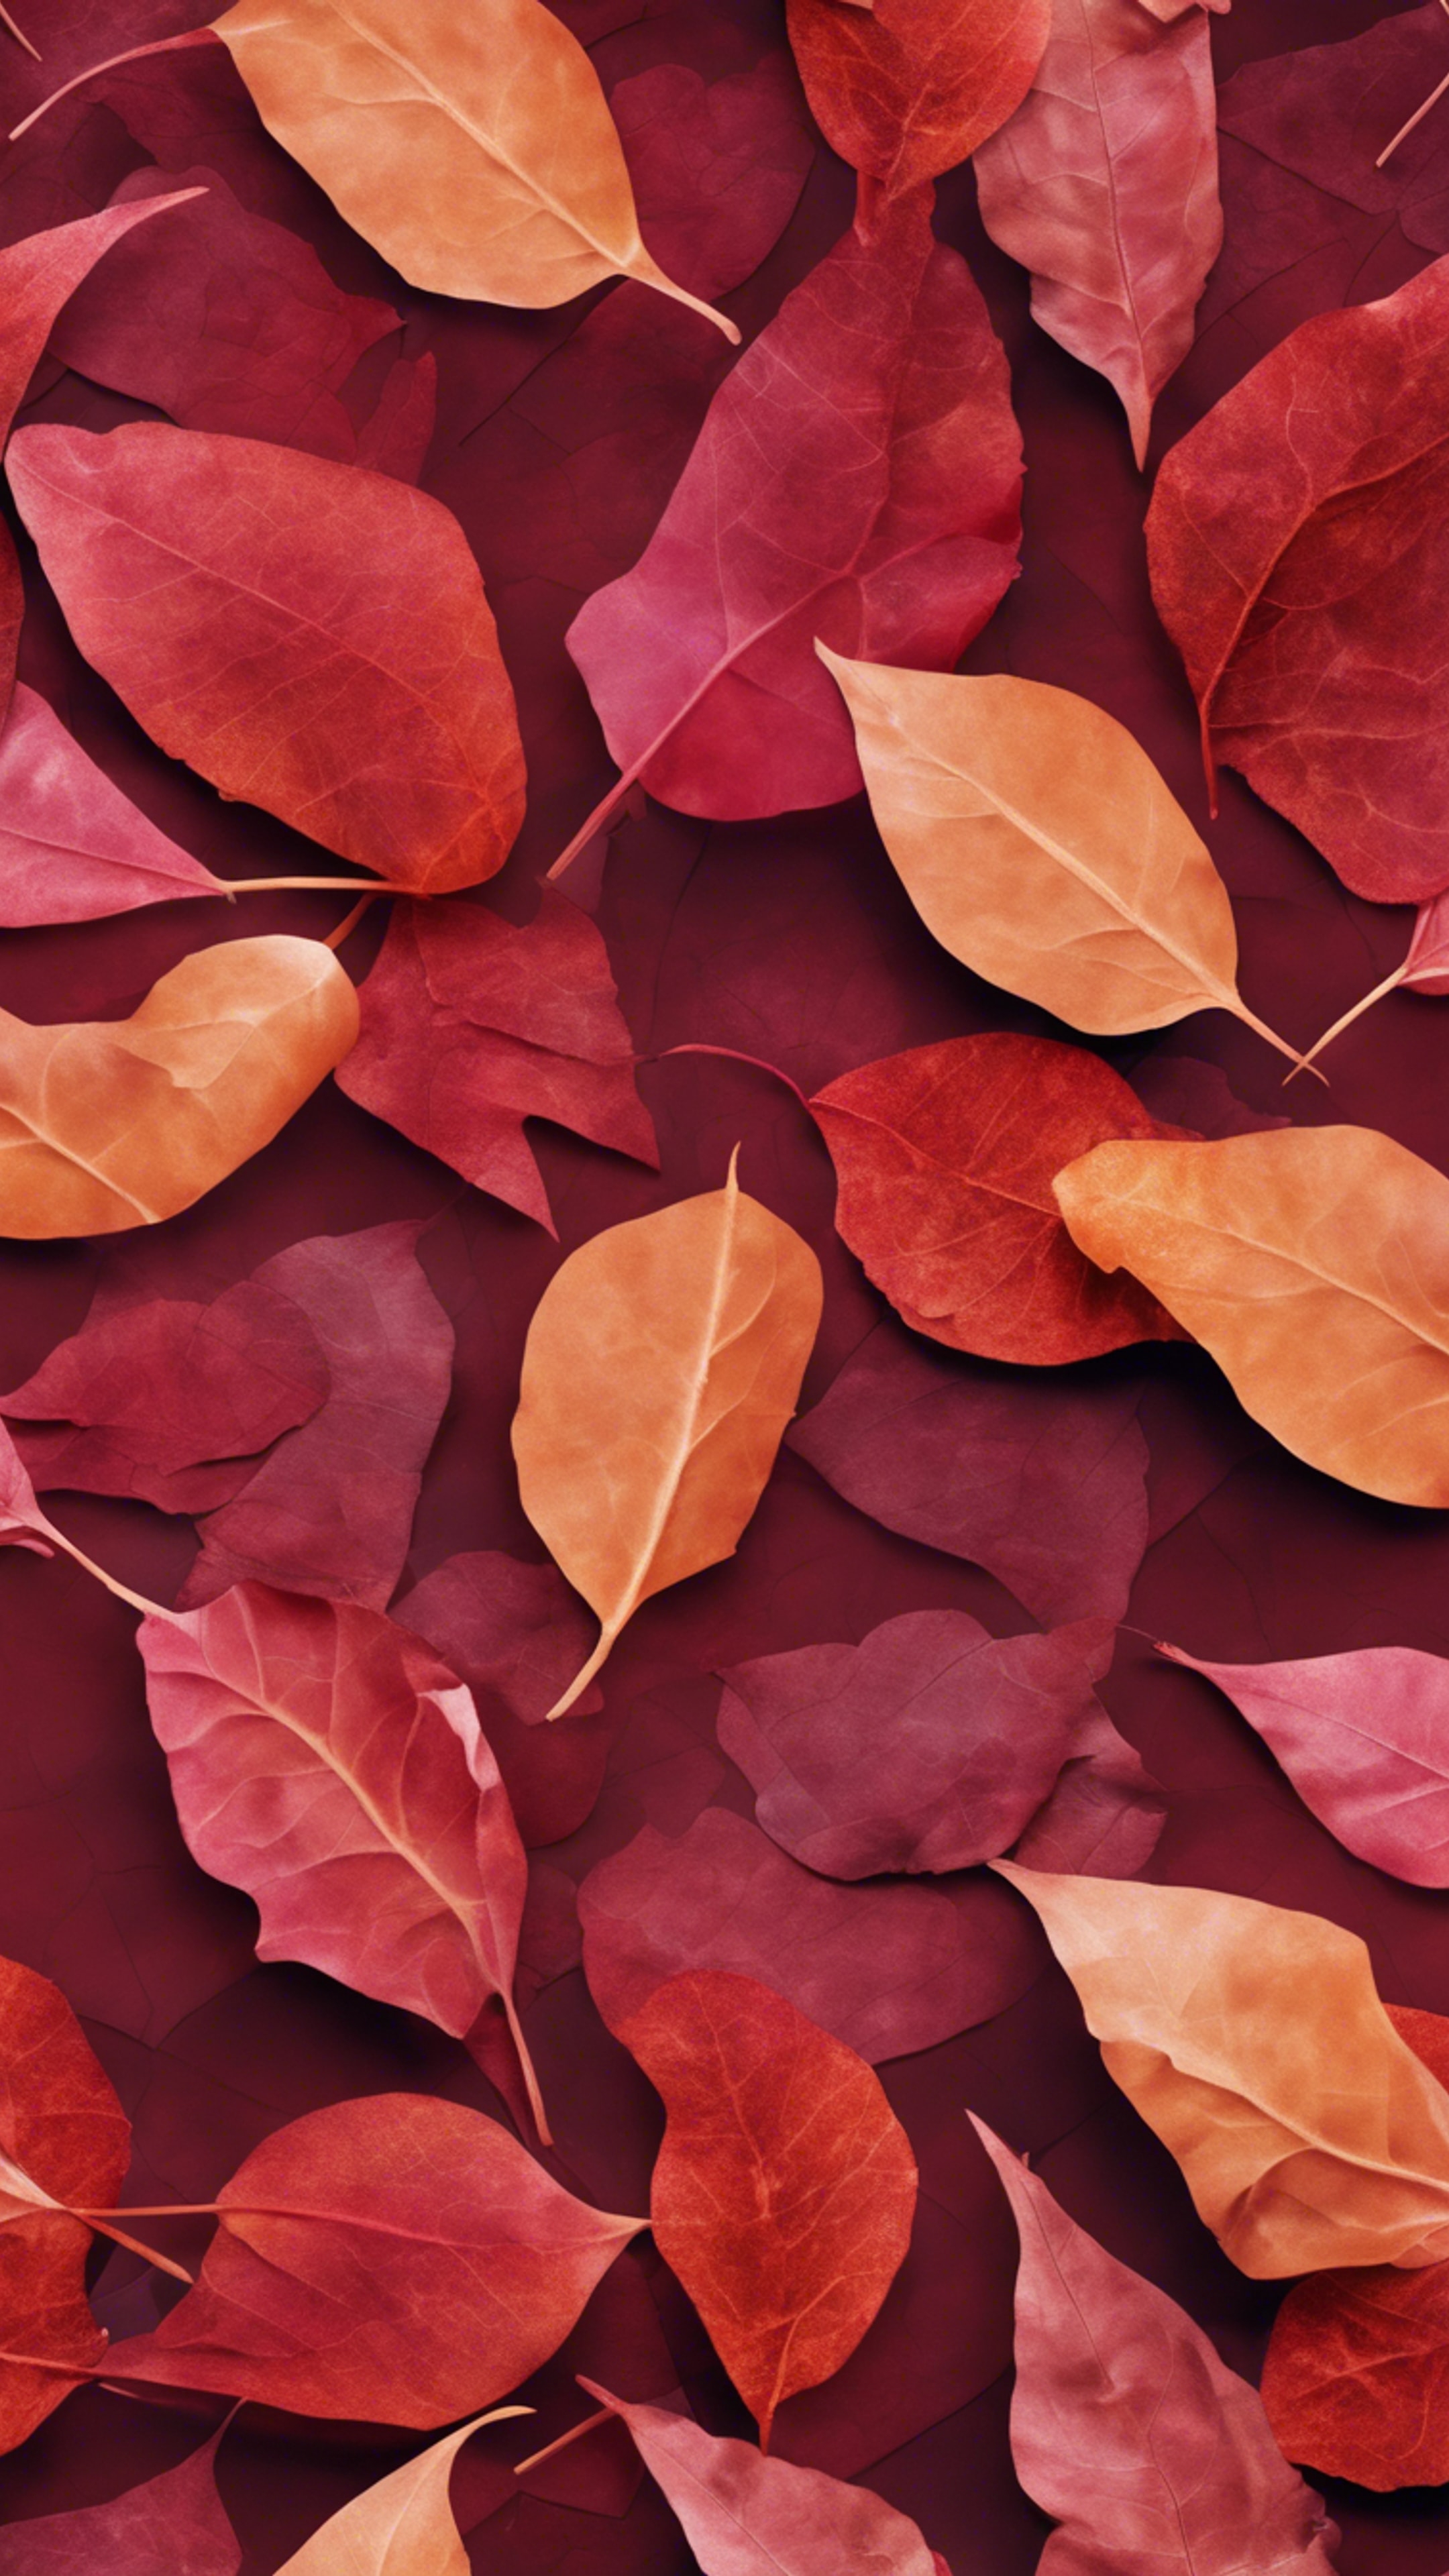 An abstract, tessellating pattern of fiery ruby and russet shapes, reminiscent of falling leaves in autumn. Дэлгэцийн зураг[1bca3c6cf9b9400393d6]